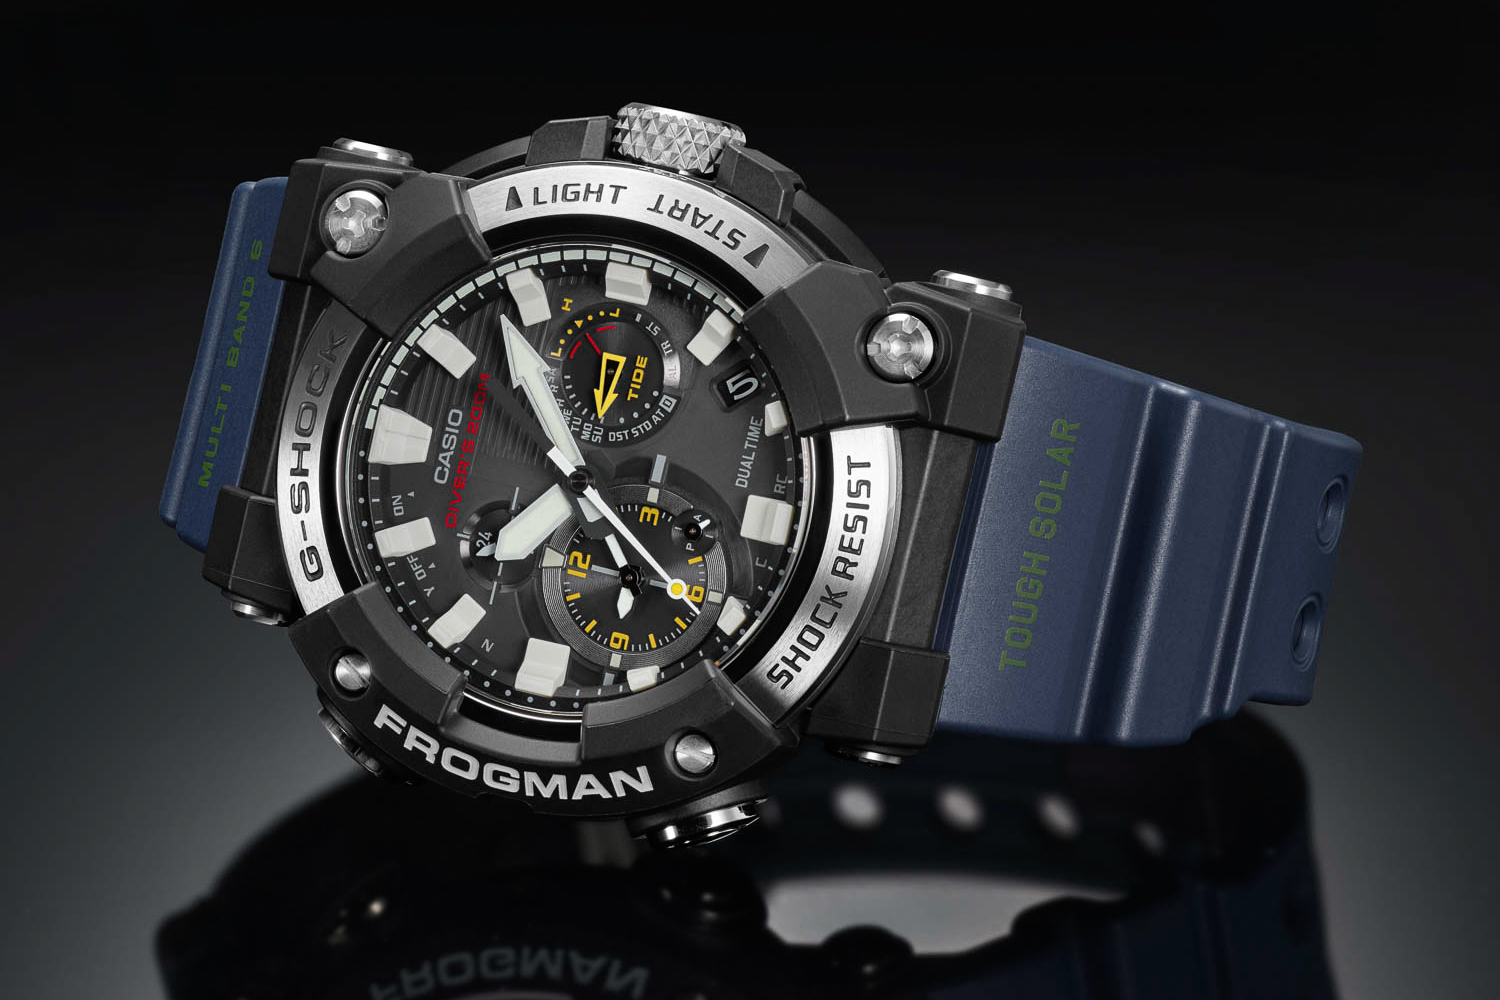 Casio G-Shock Introduces First-Ever Analog Frogman Watch